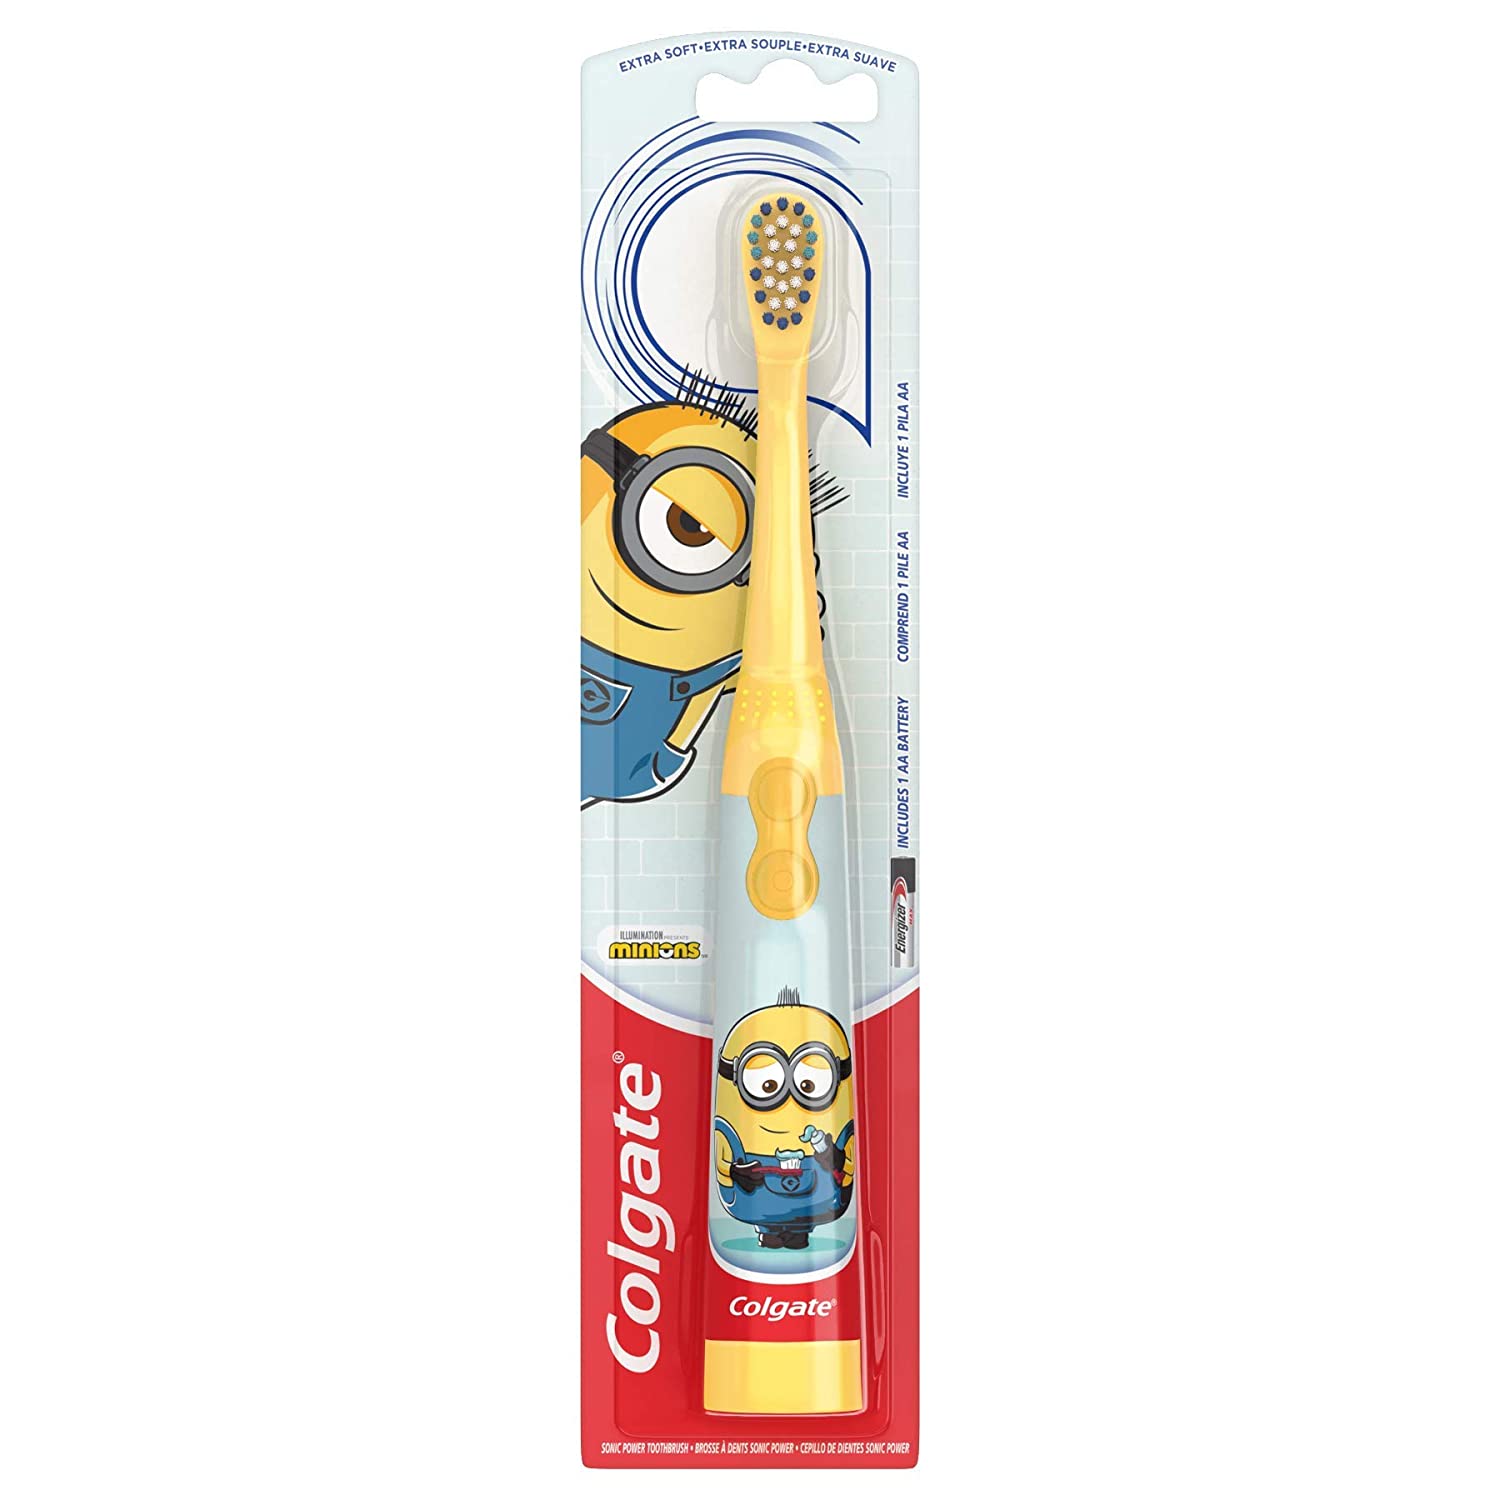 Colgate Kids Battery Powered Toothbrush Minions w/ Extra Soft Bristles $3.75 + Free Shipping w/ Prime or on orders over $25